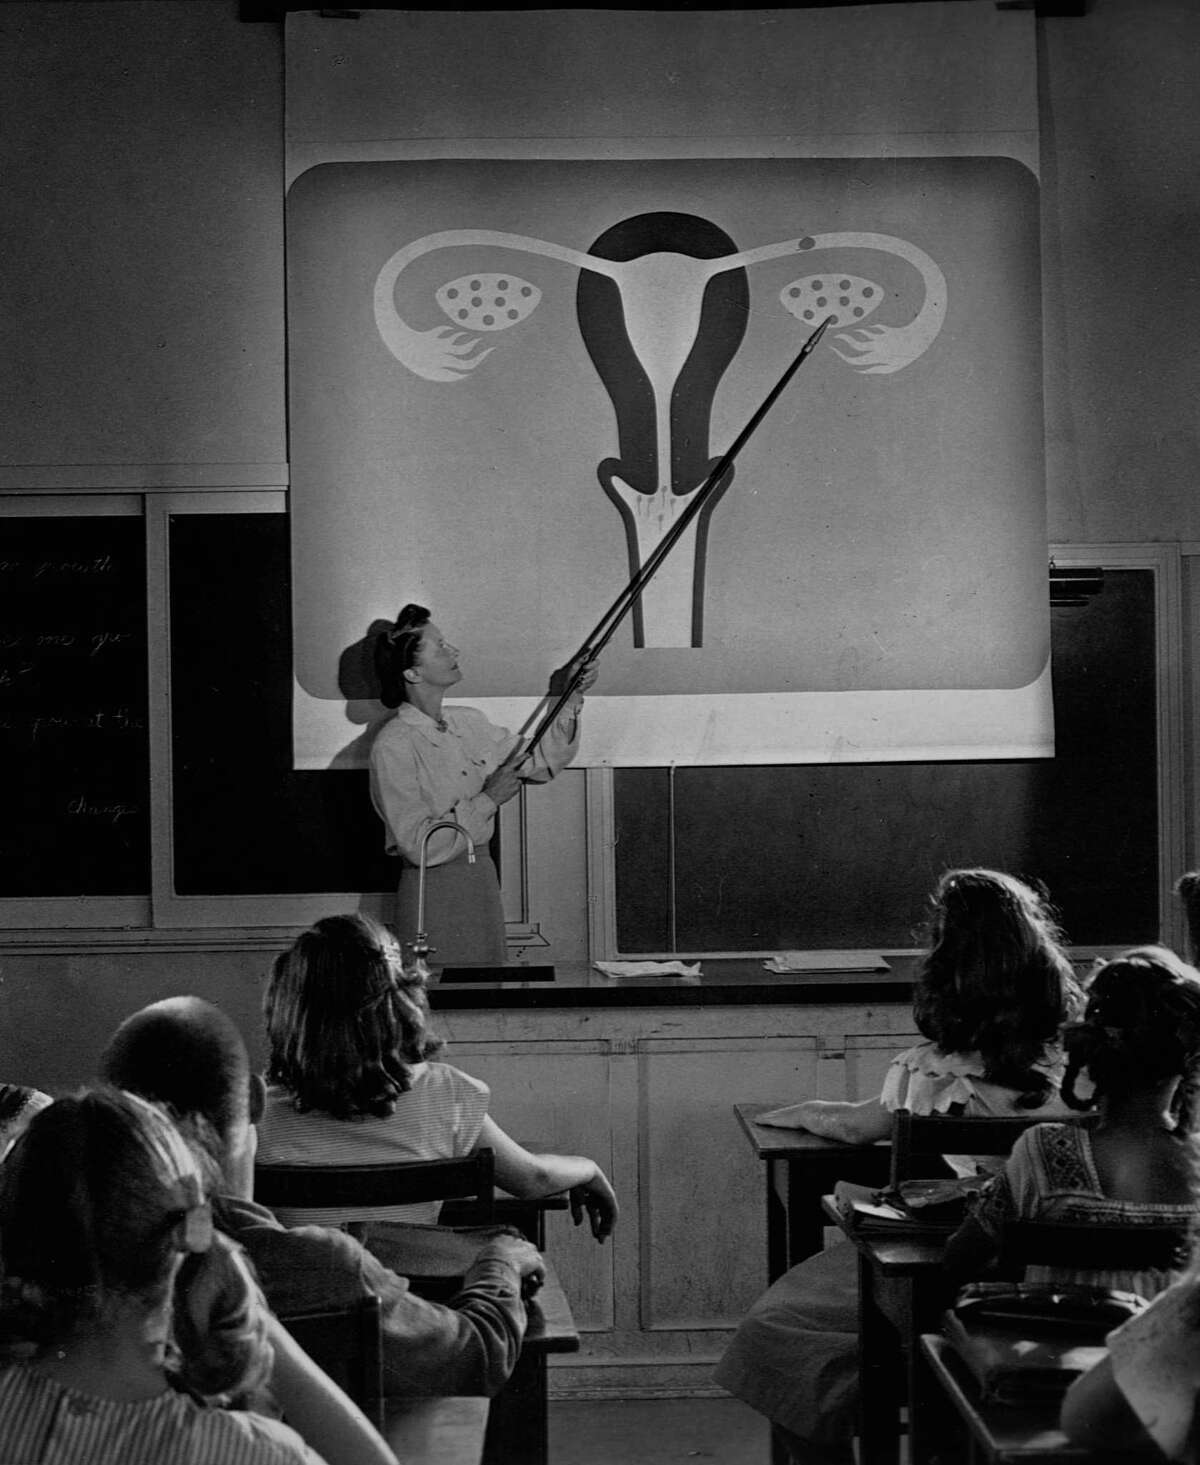 A teacher points to a diagram of female reproductive organs projected on a screen in a classroom in a scene from Human Growth, an education film on sex education shown to students in Oregon junior high schools beginning in 1948. (Photo by Library of Congress/Corbis/VCG via Getty Images)